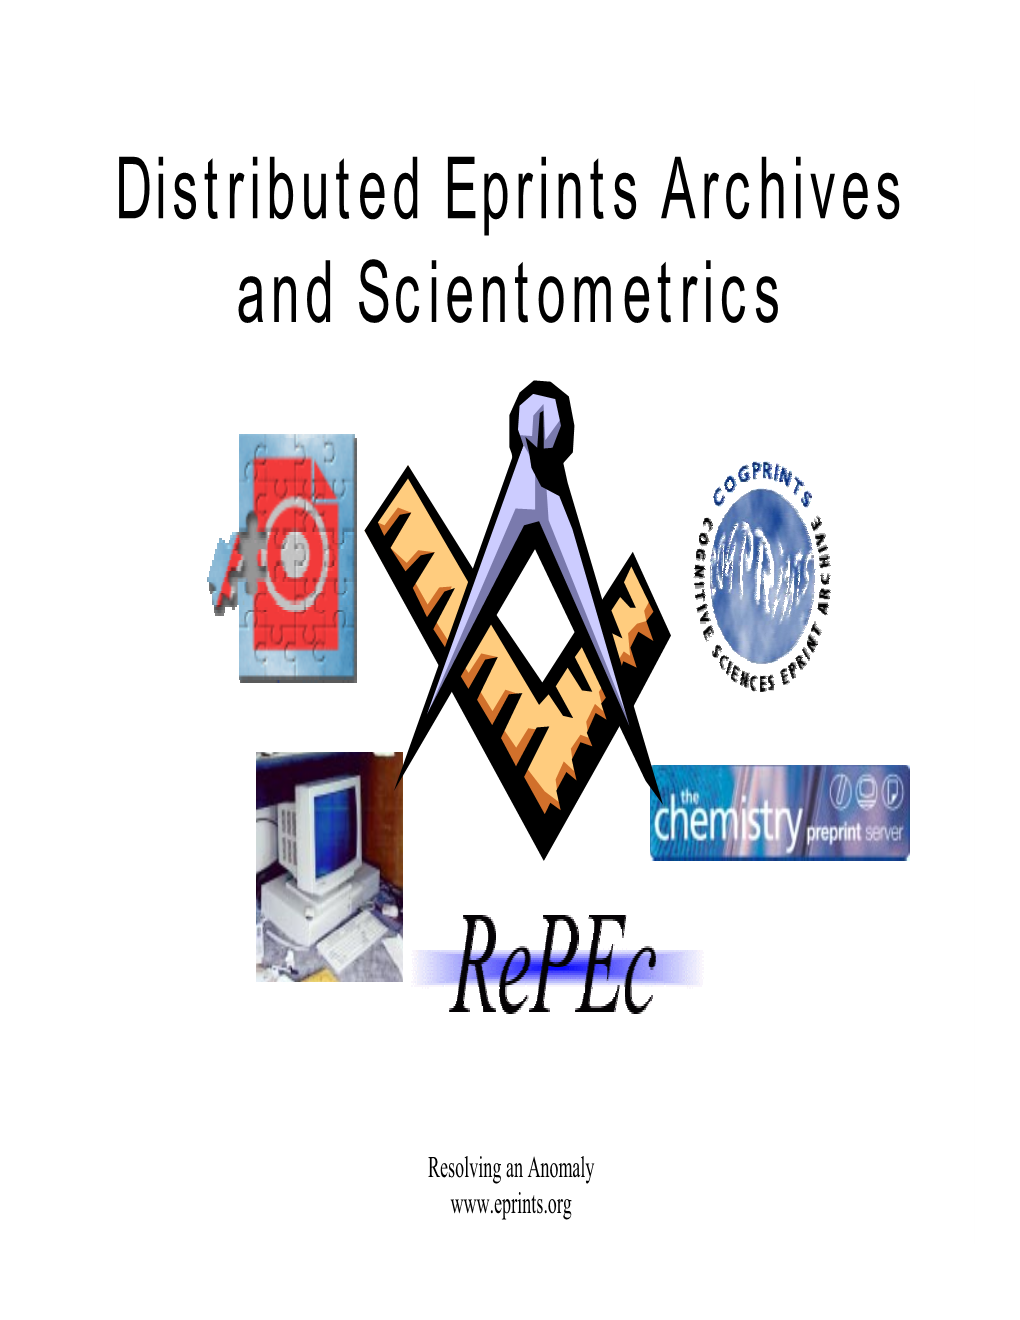 Distributed Eprints Archives and Scientometrics